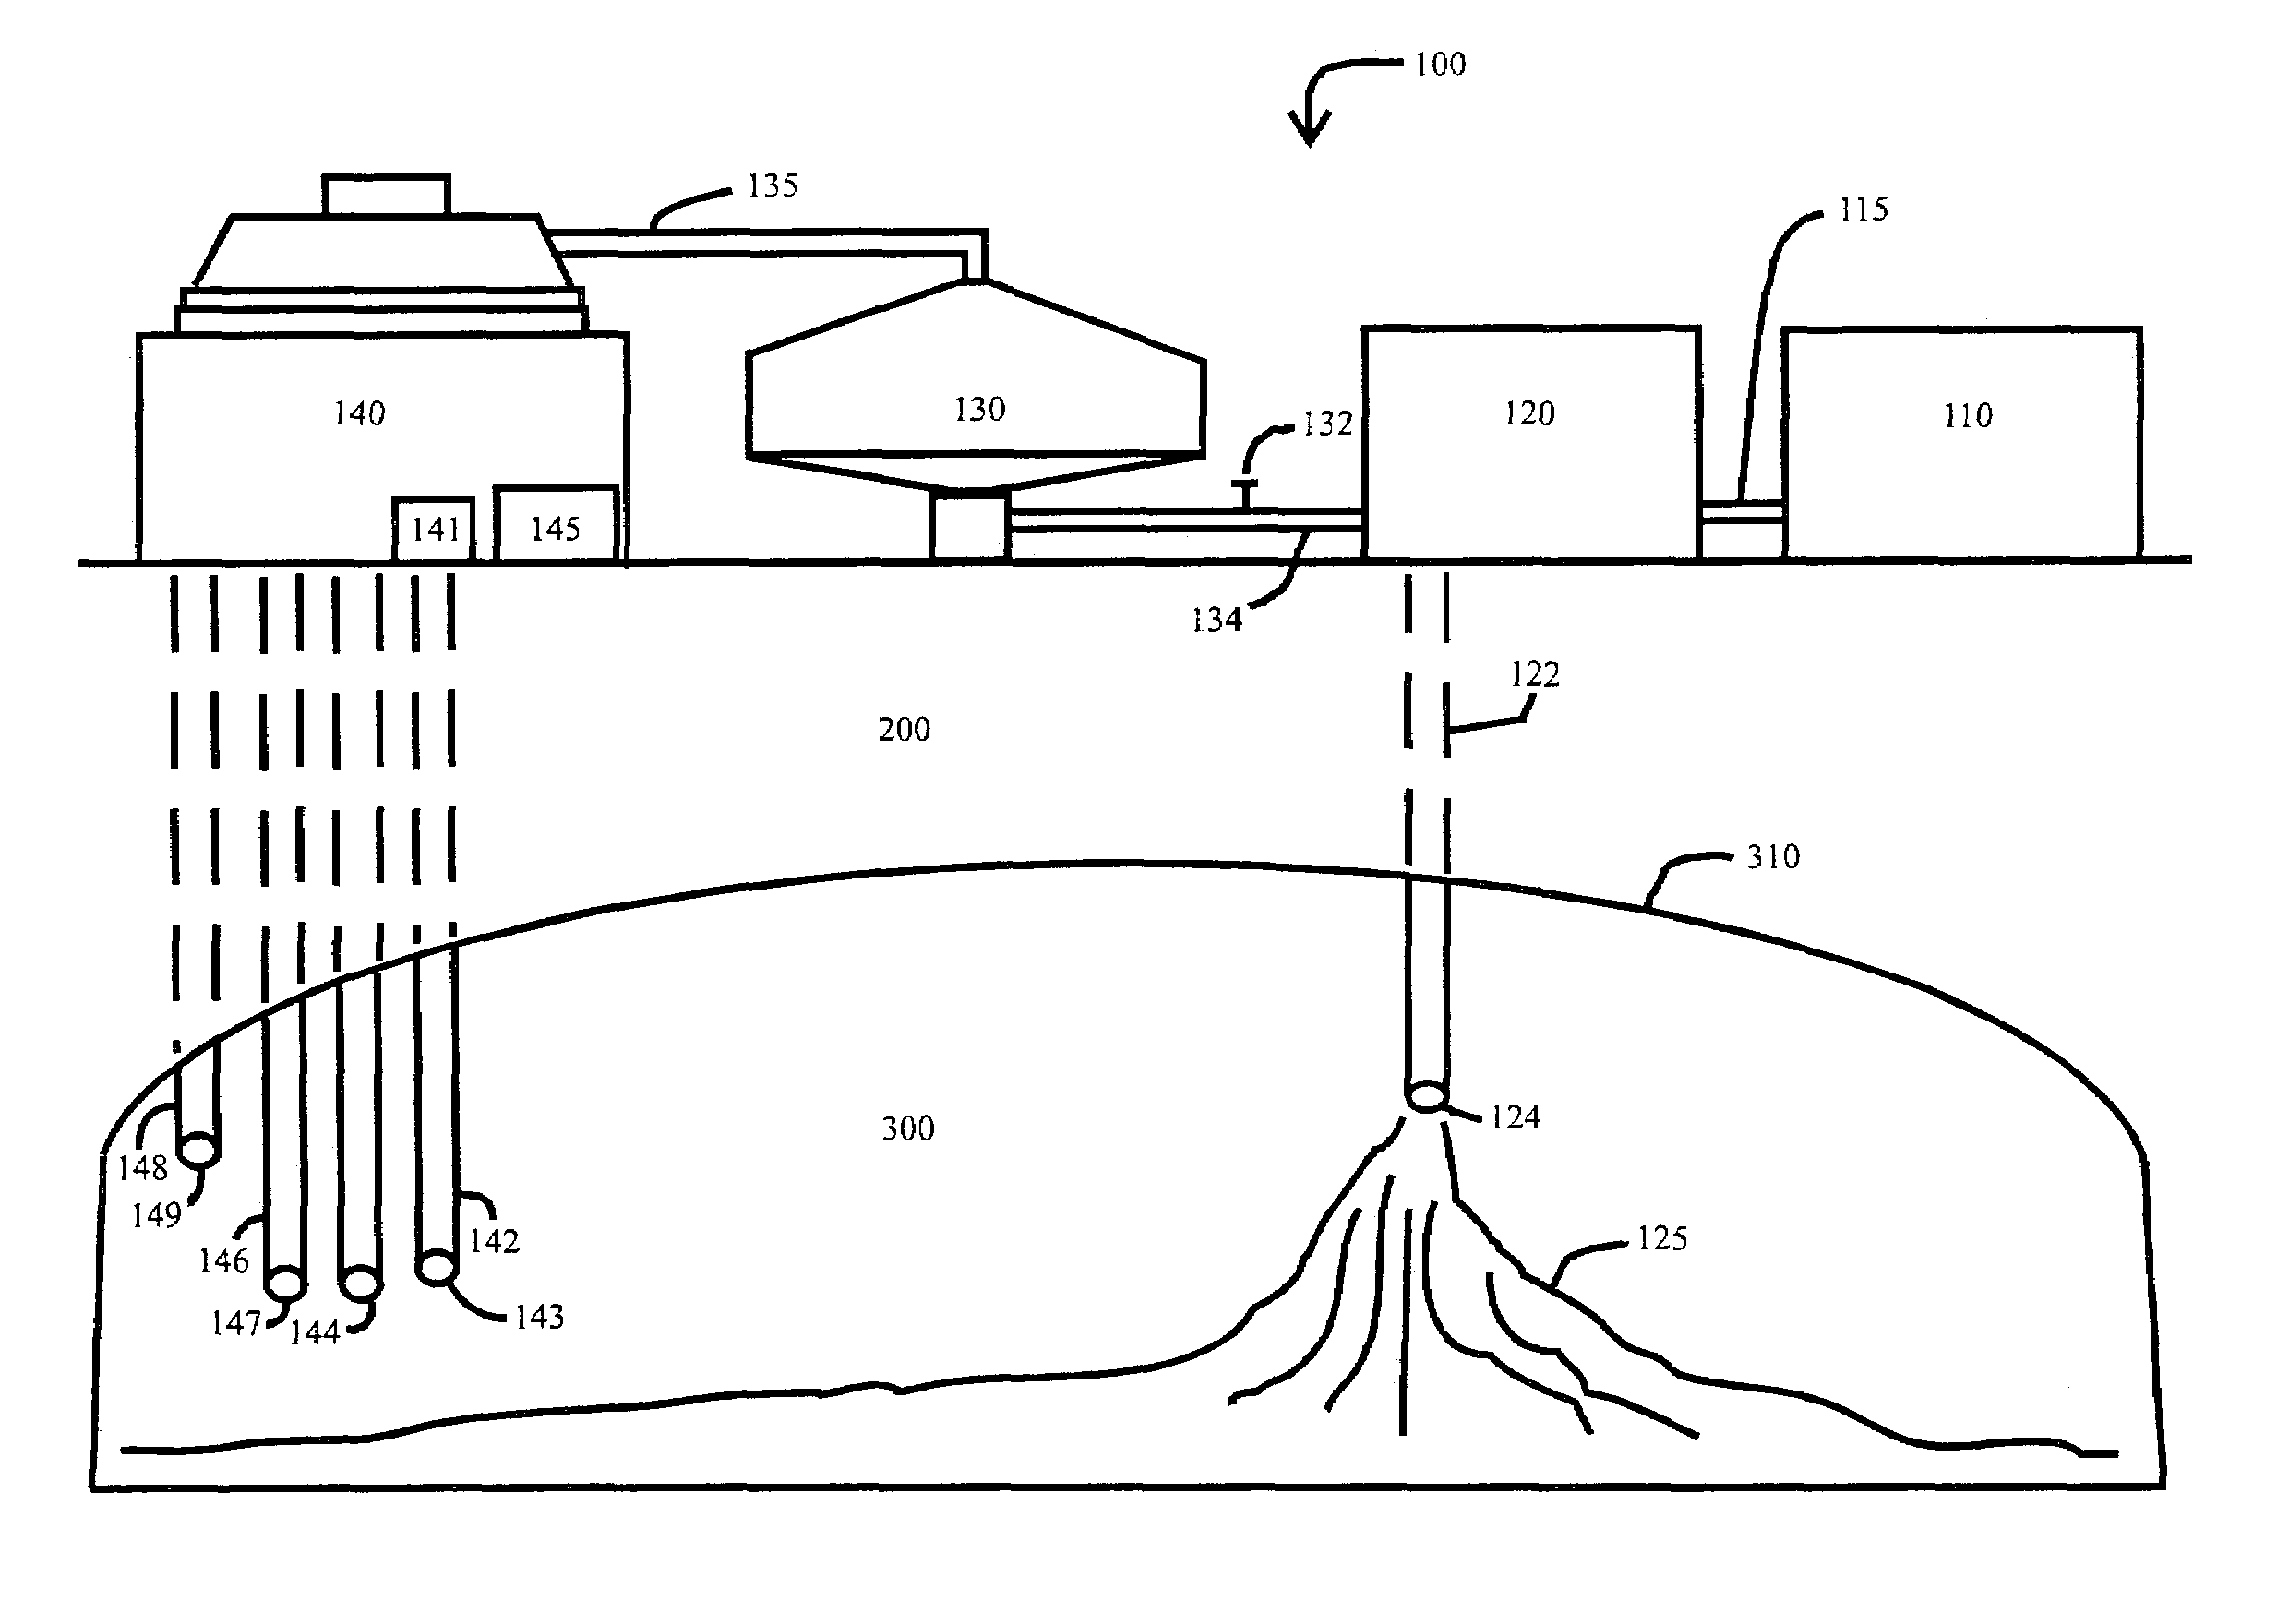 Subterranean waste disposal process and system